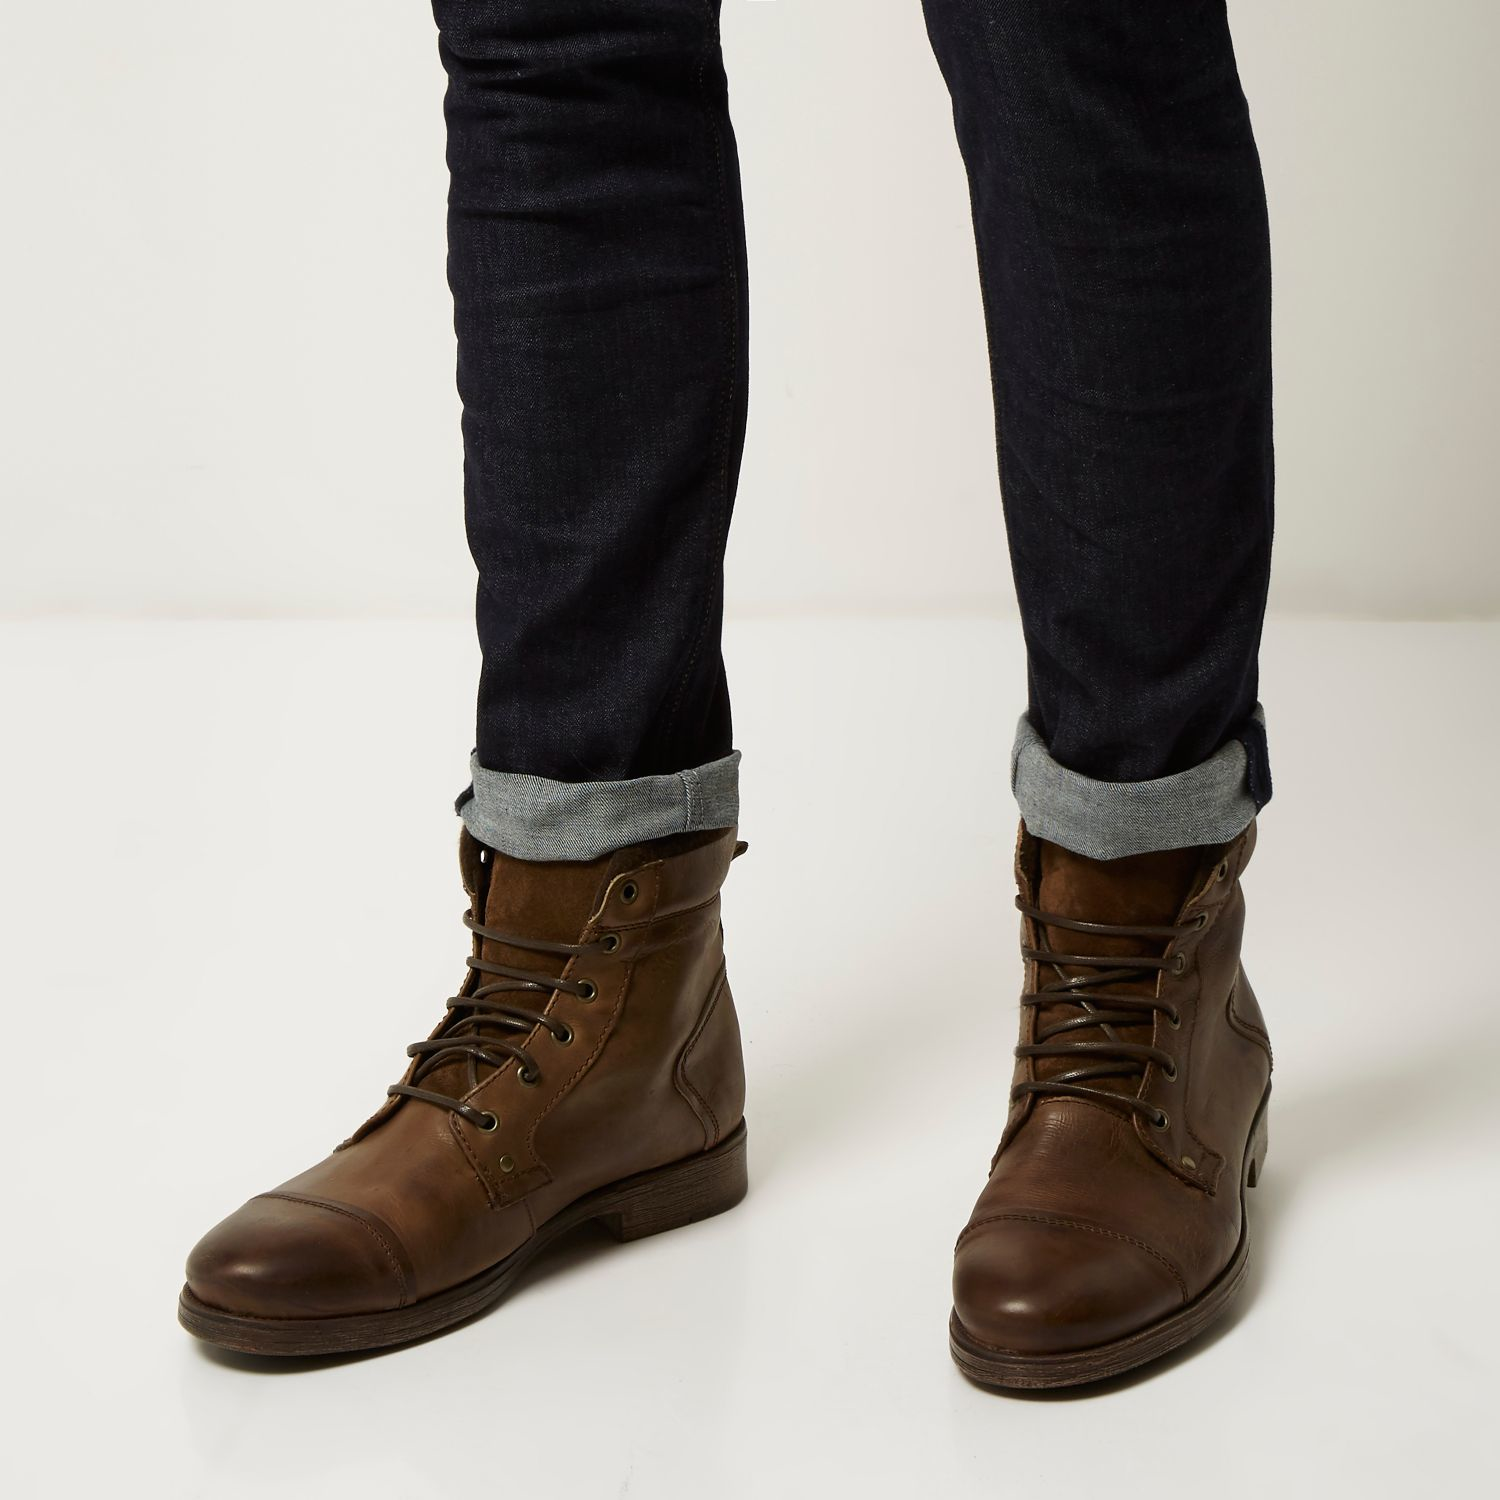 River Island Dark Brown Leather Utility Boots for Men - Lyst